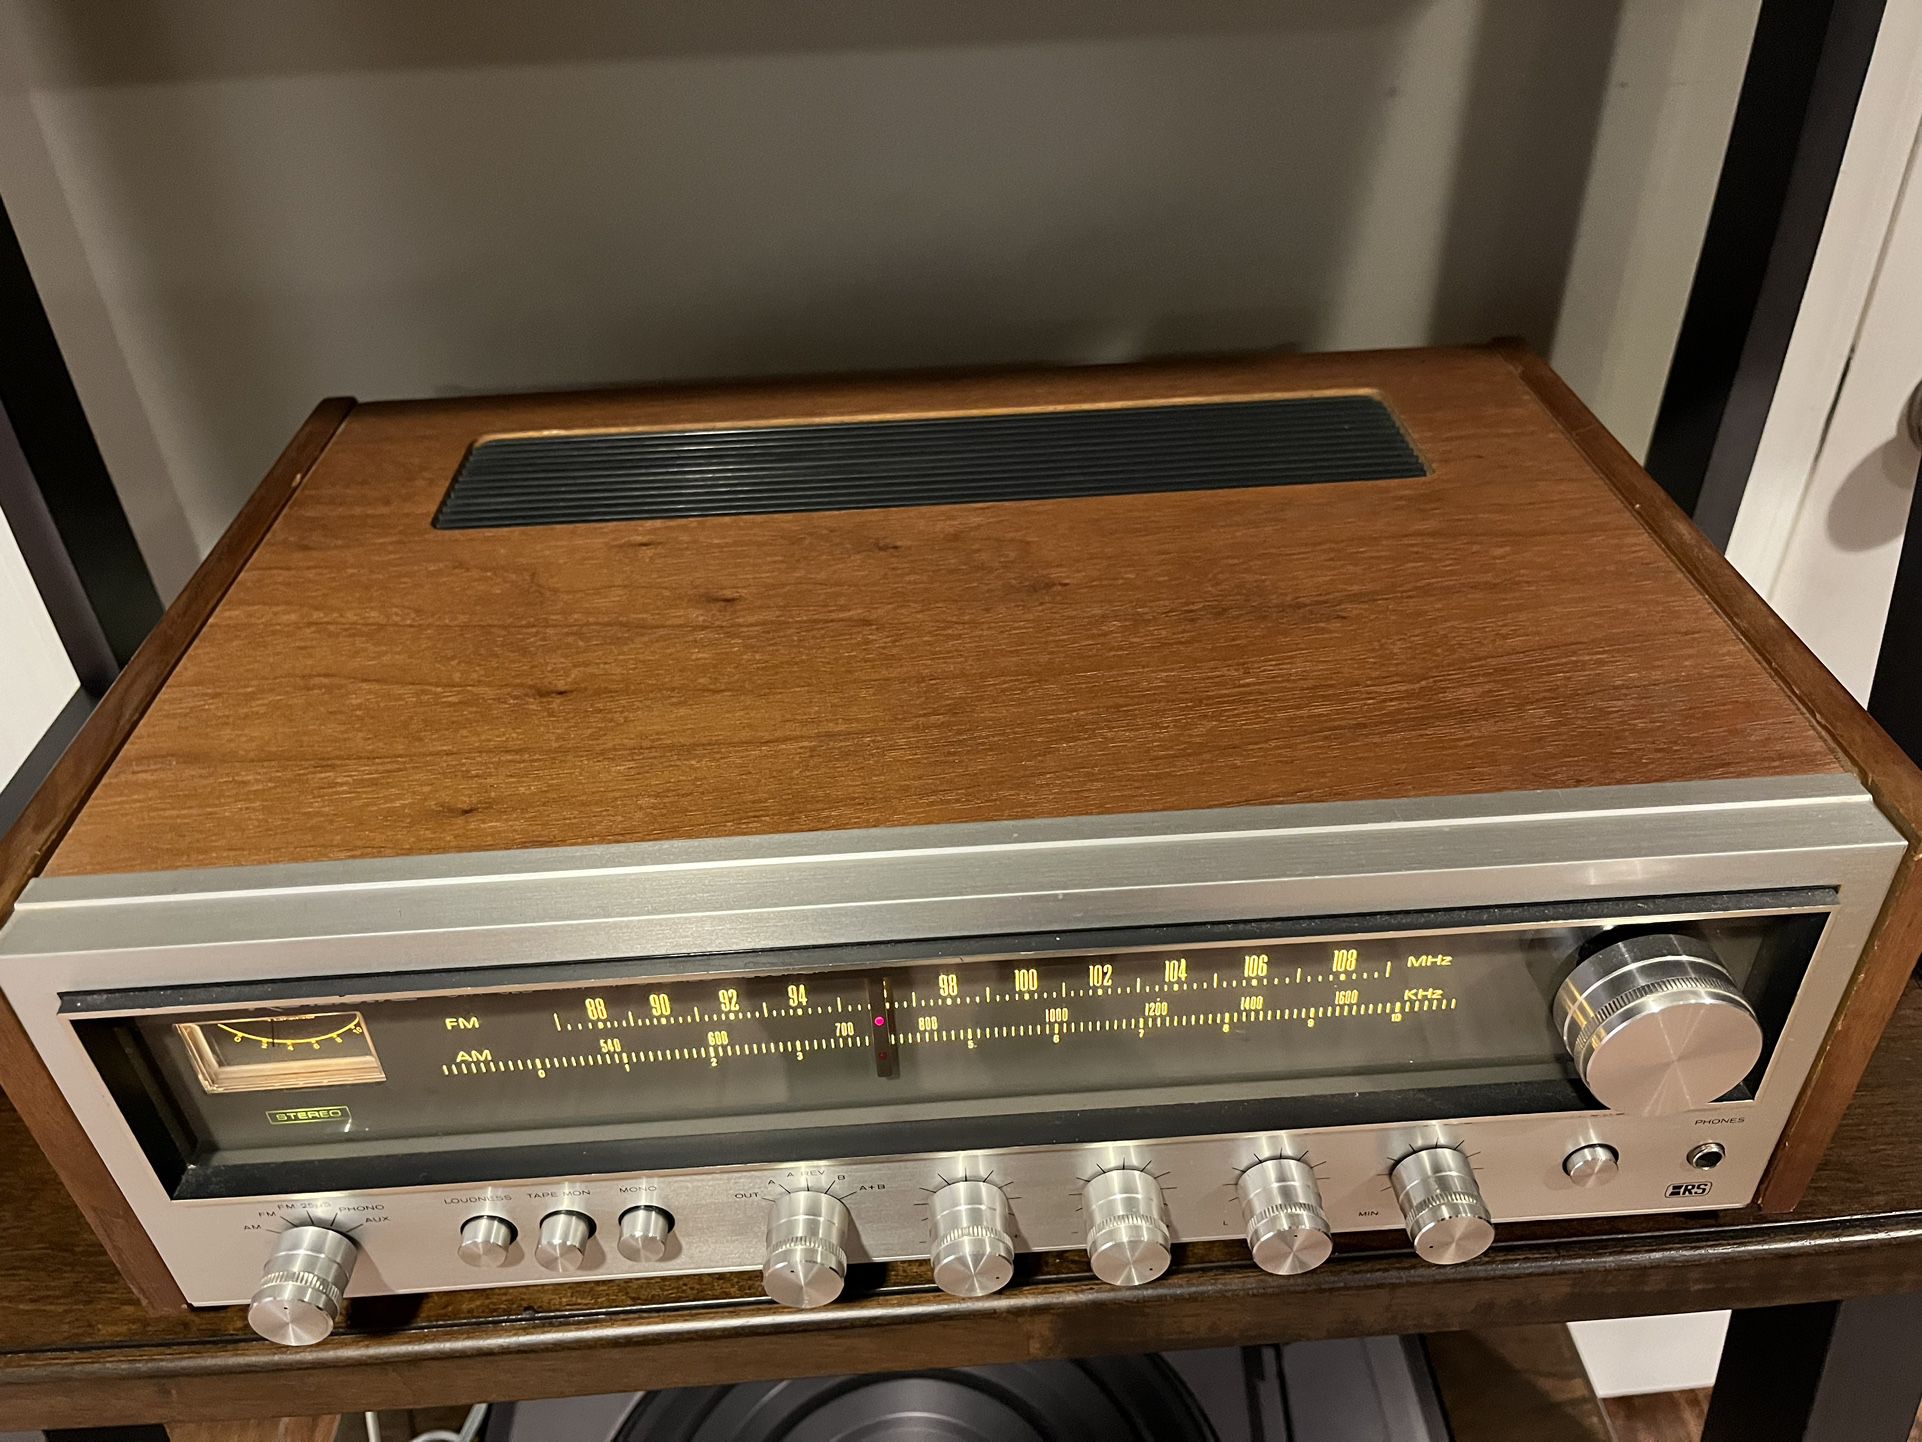 Vintage Stereo Receiver 